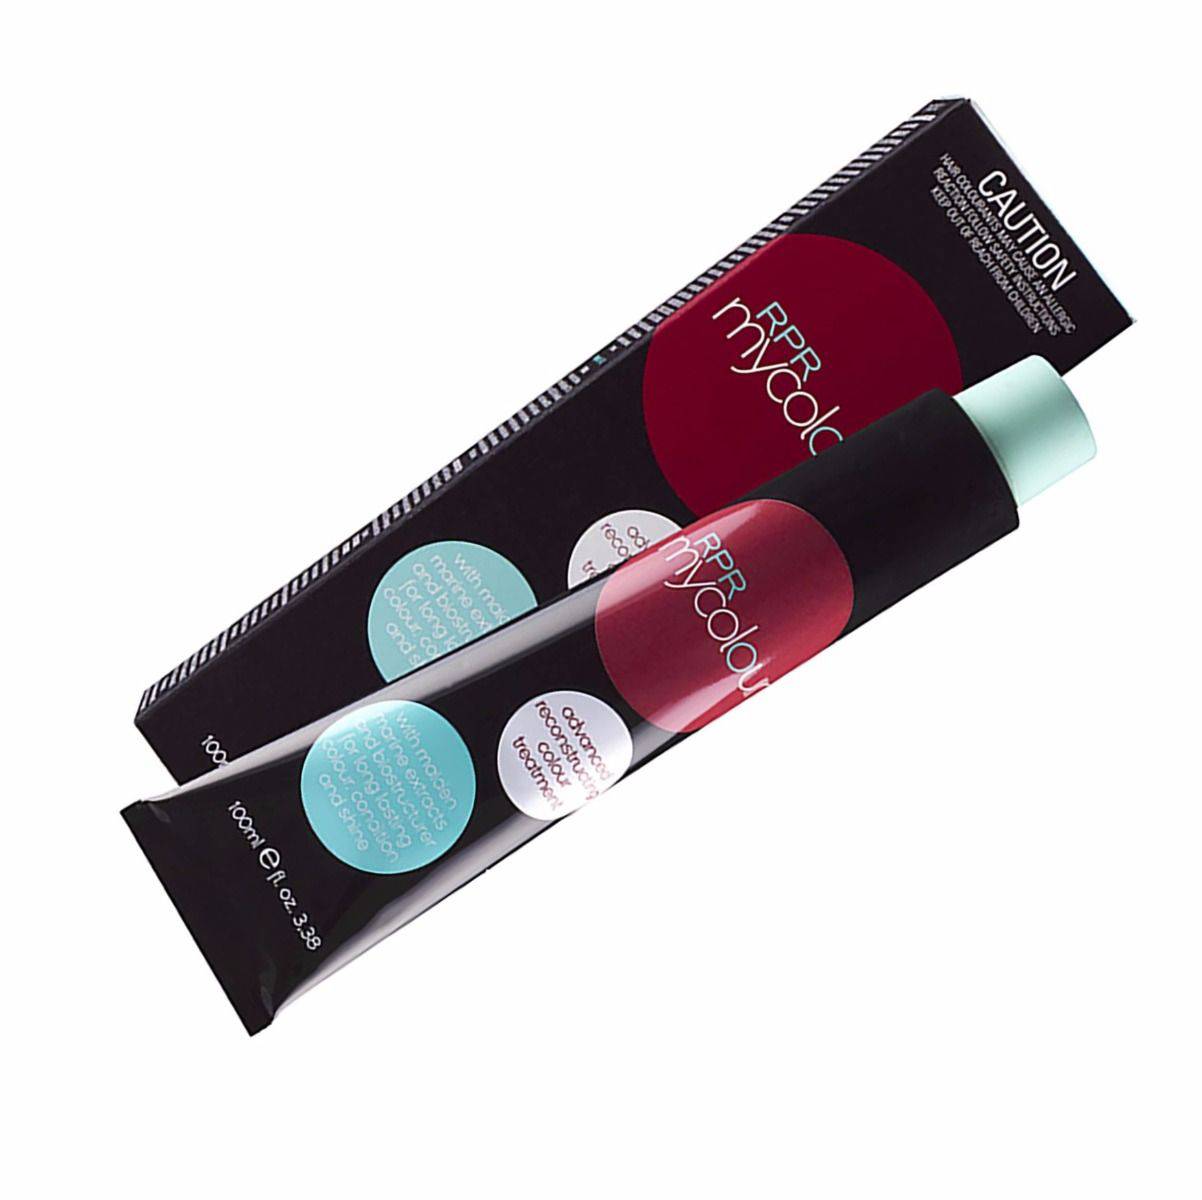 RPR My Colour 8.00 Level 8 Intense Natural 100g tube Mix 1:1.5 My Colour - On Line Hair Depot